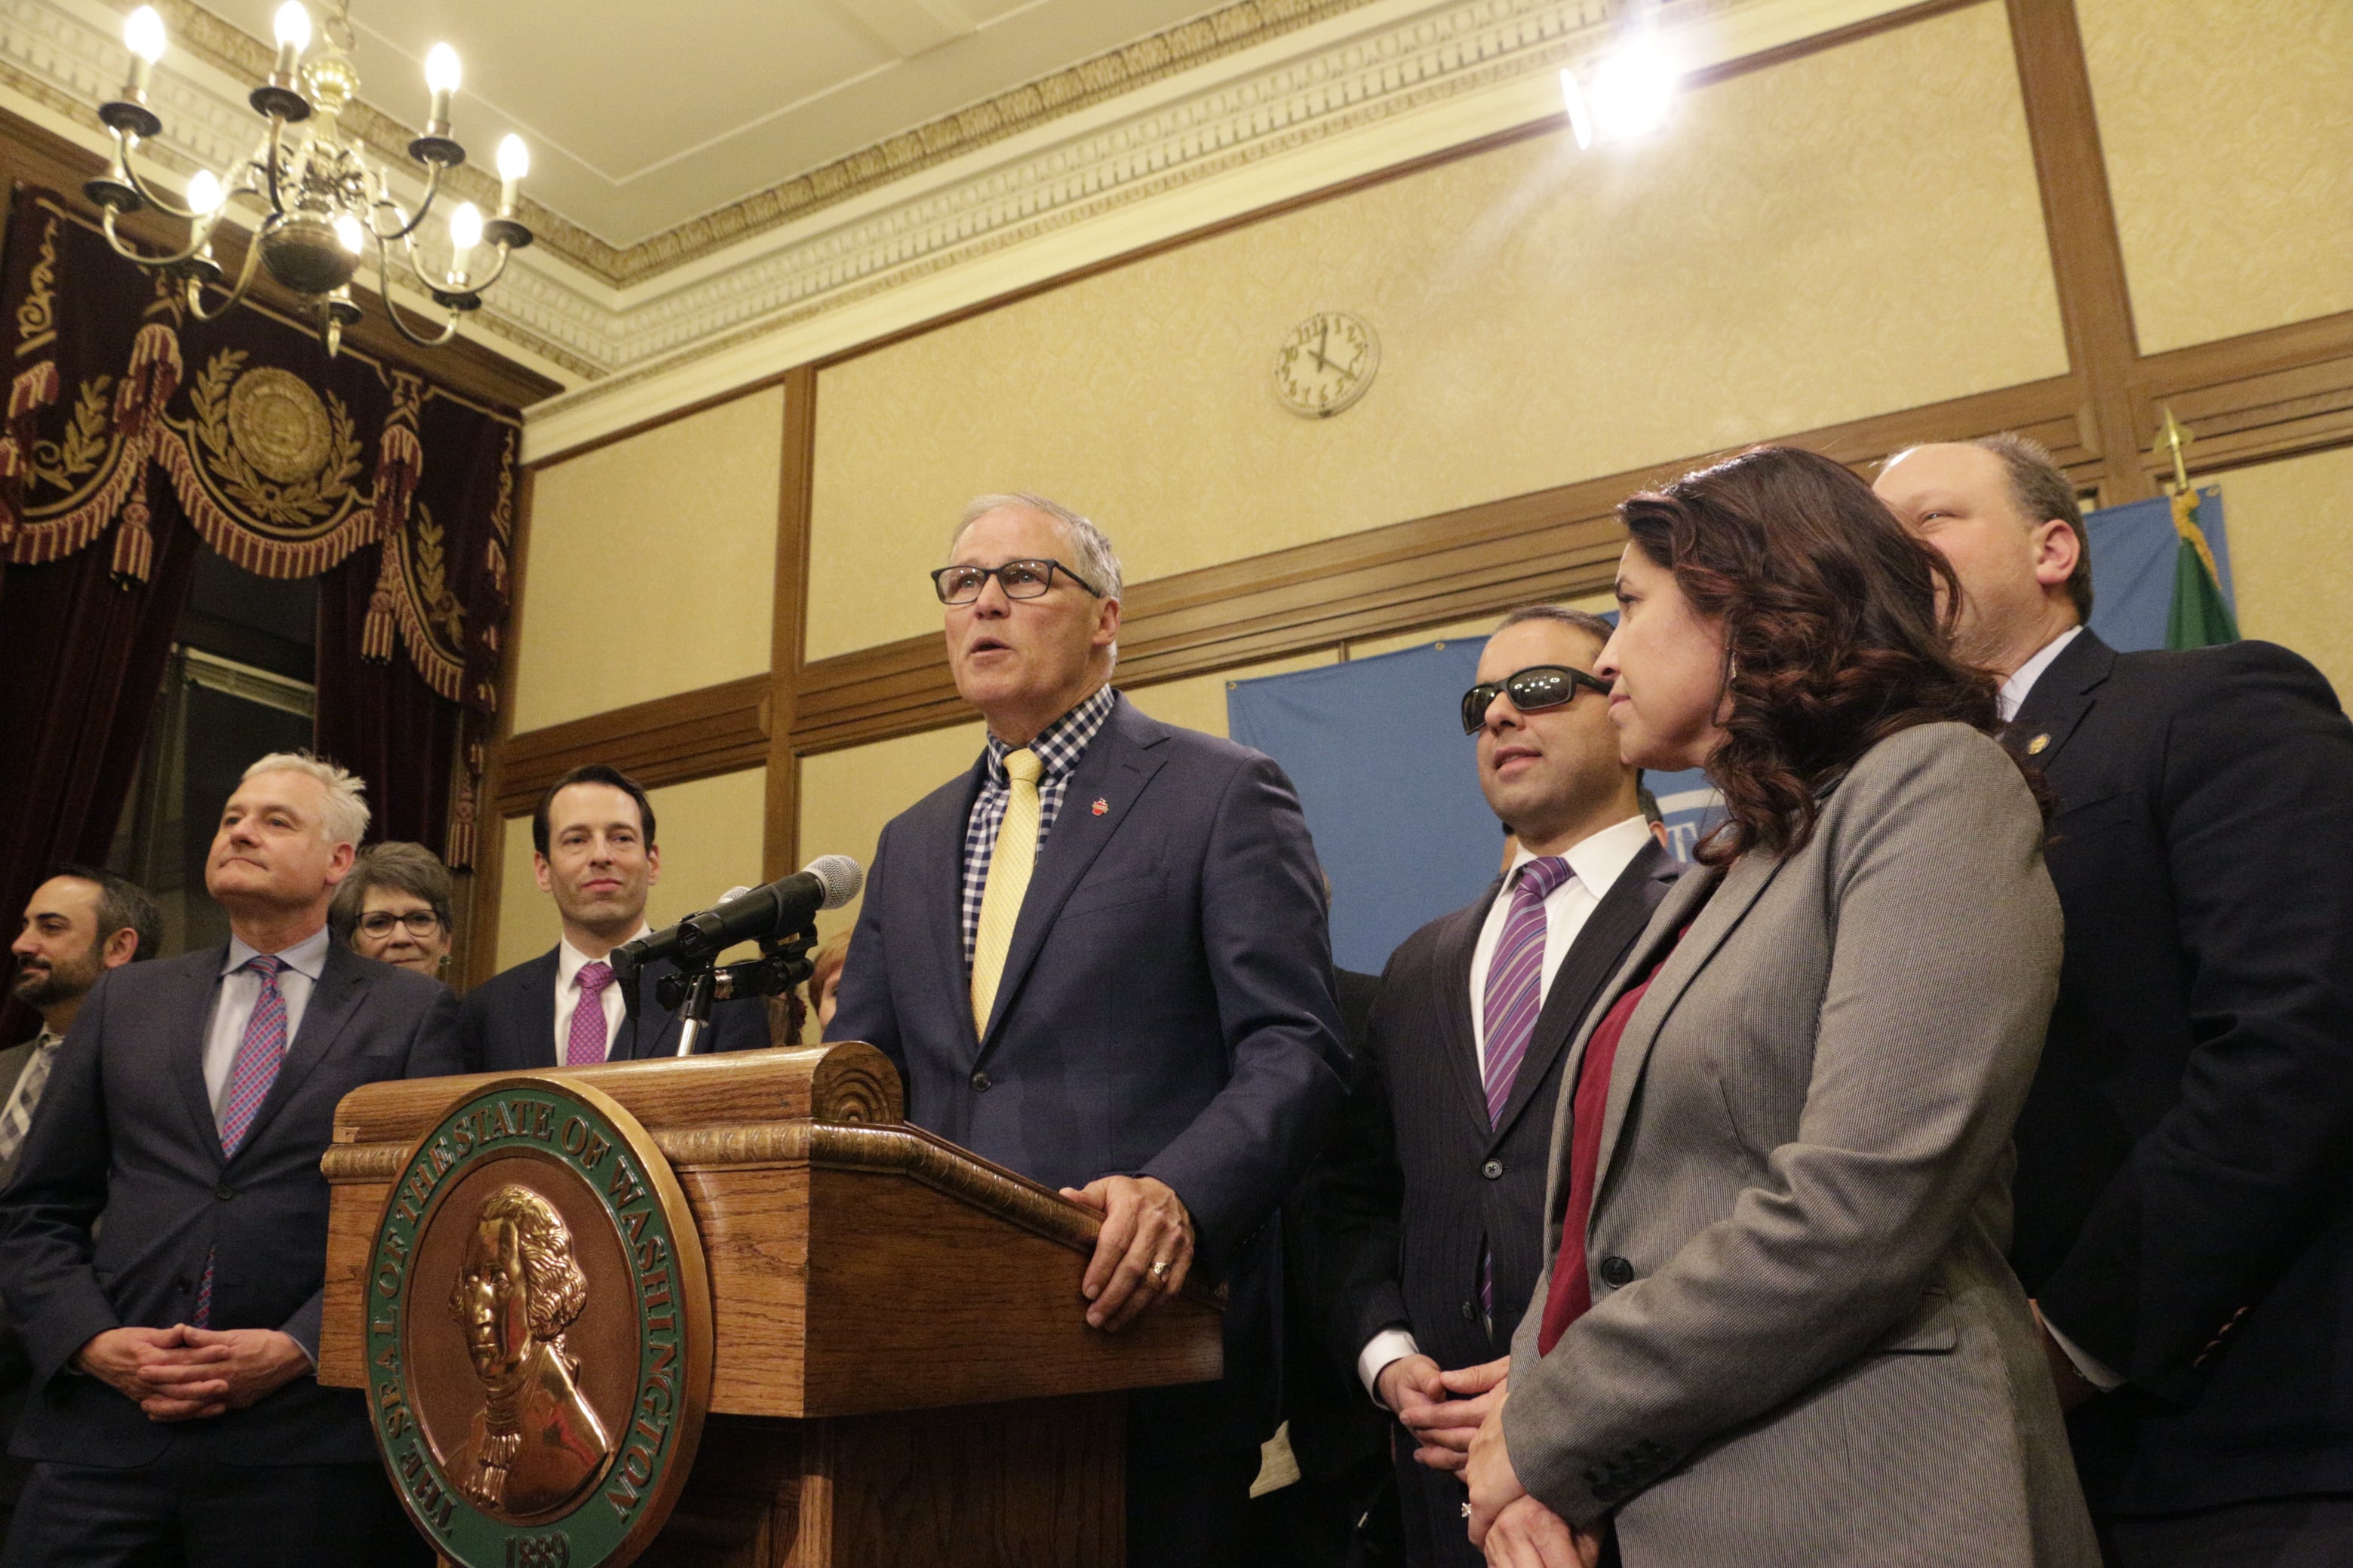 Gov. Jay Inslee, surrounded by Democratic lawmakers from the Senate and House, talks to the media early Monday morning following the Washington Legislature adjourning its 105-day legislative session in Olympia, Wash. Lawmakers passed a new, two-year budget before adjourning for the year.